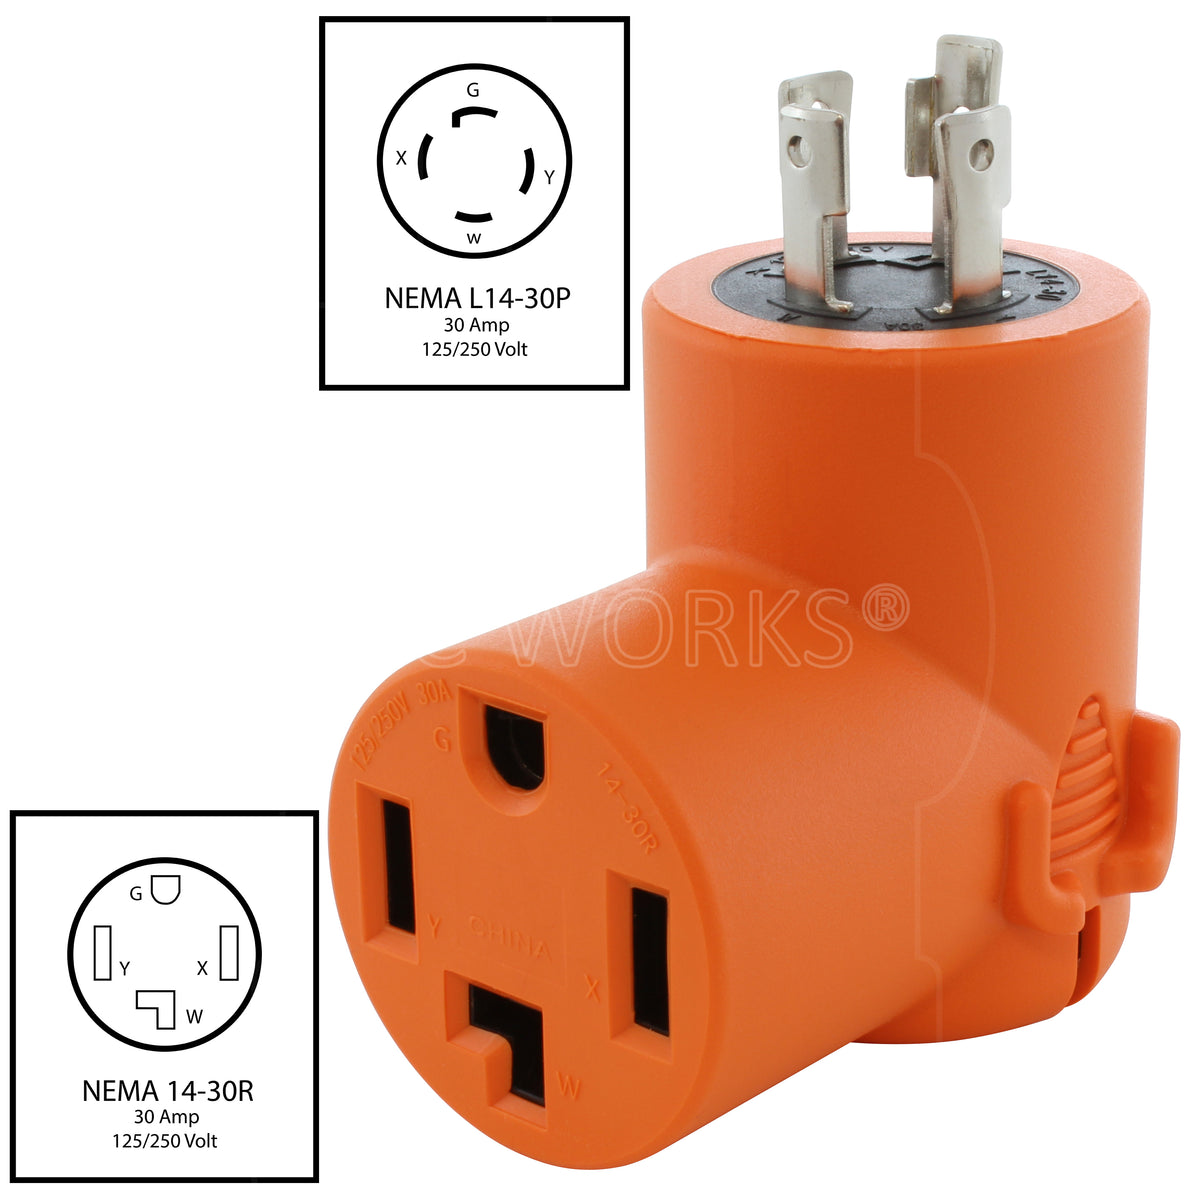 AC WORKS® L14-30P 4-Prong 30A Locking to 14-30R 4-Prong Dryer Outlet ...